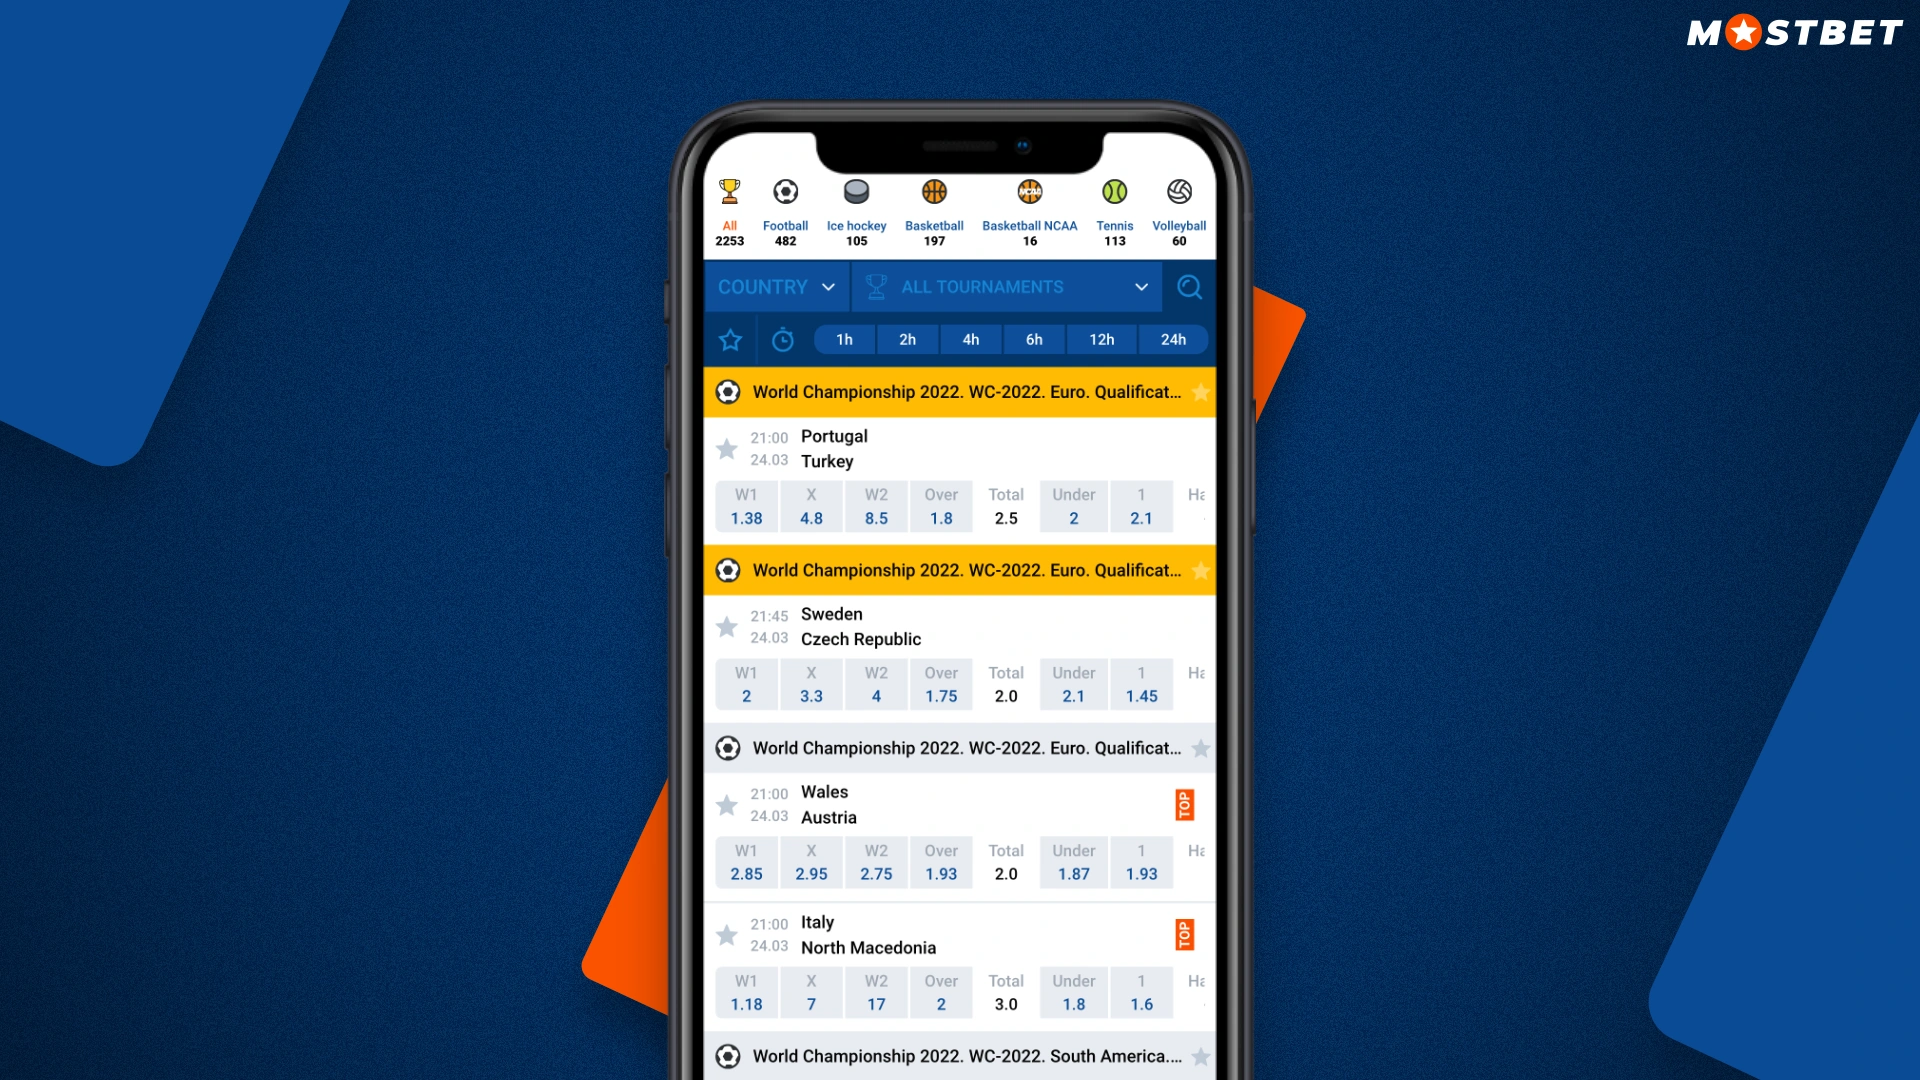 a detailed guide on how to download and install the mostbet app on iphone